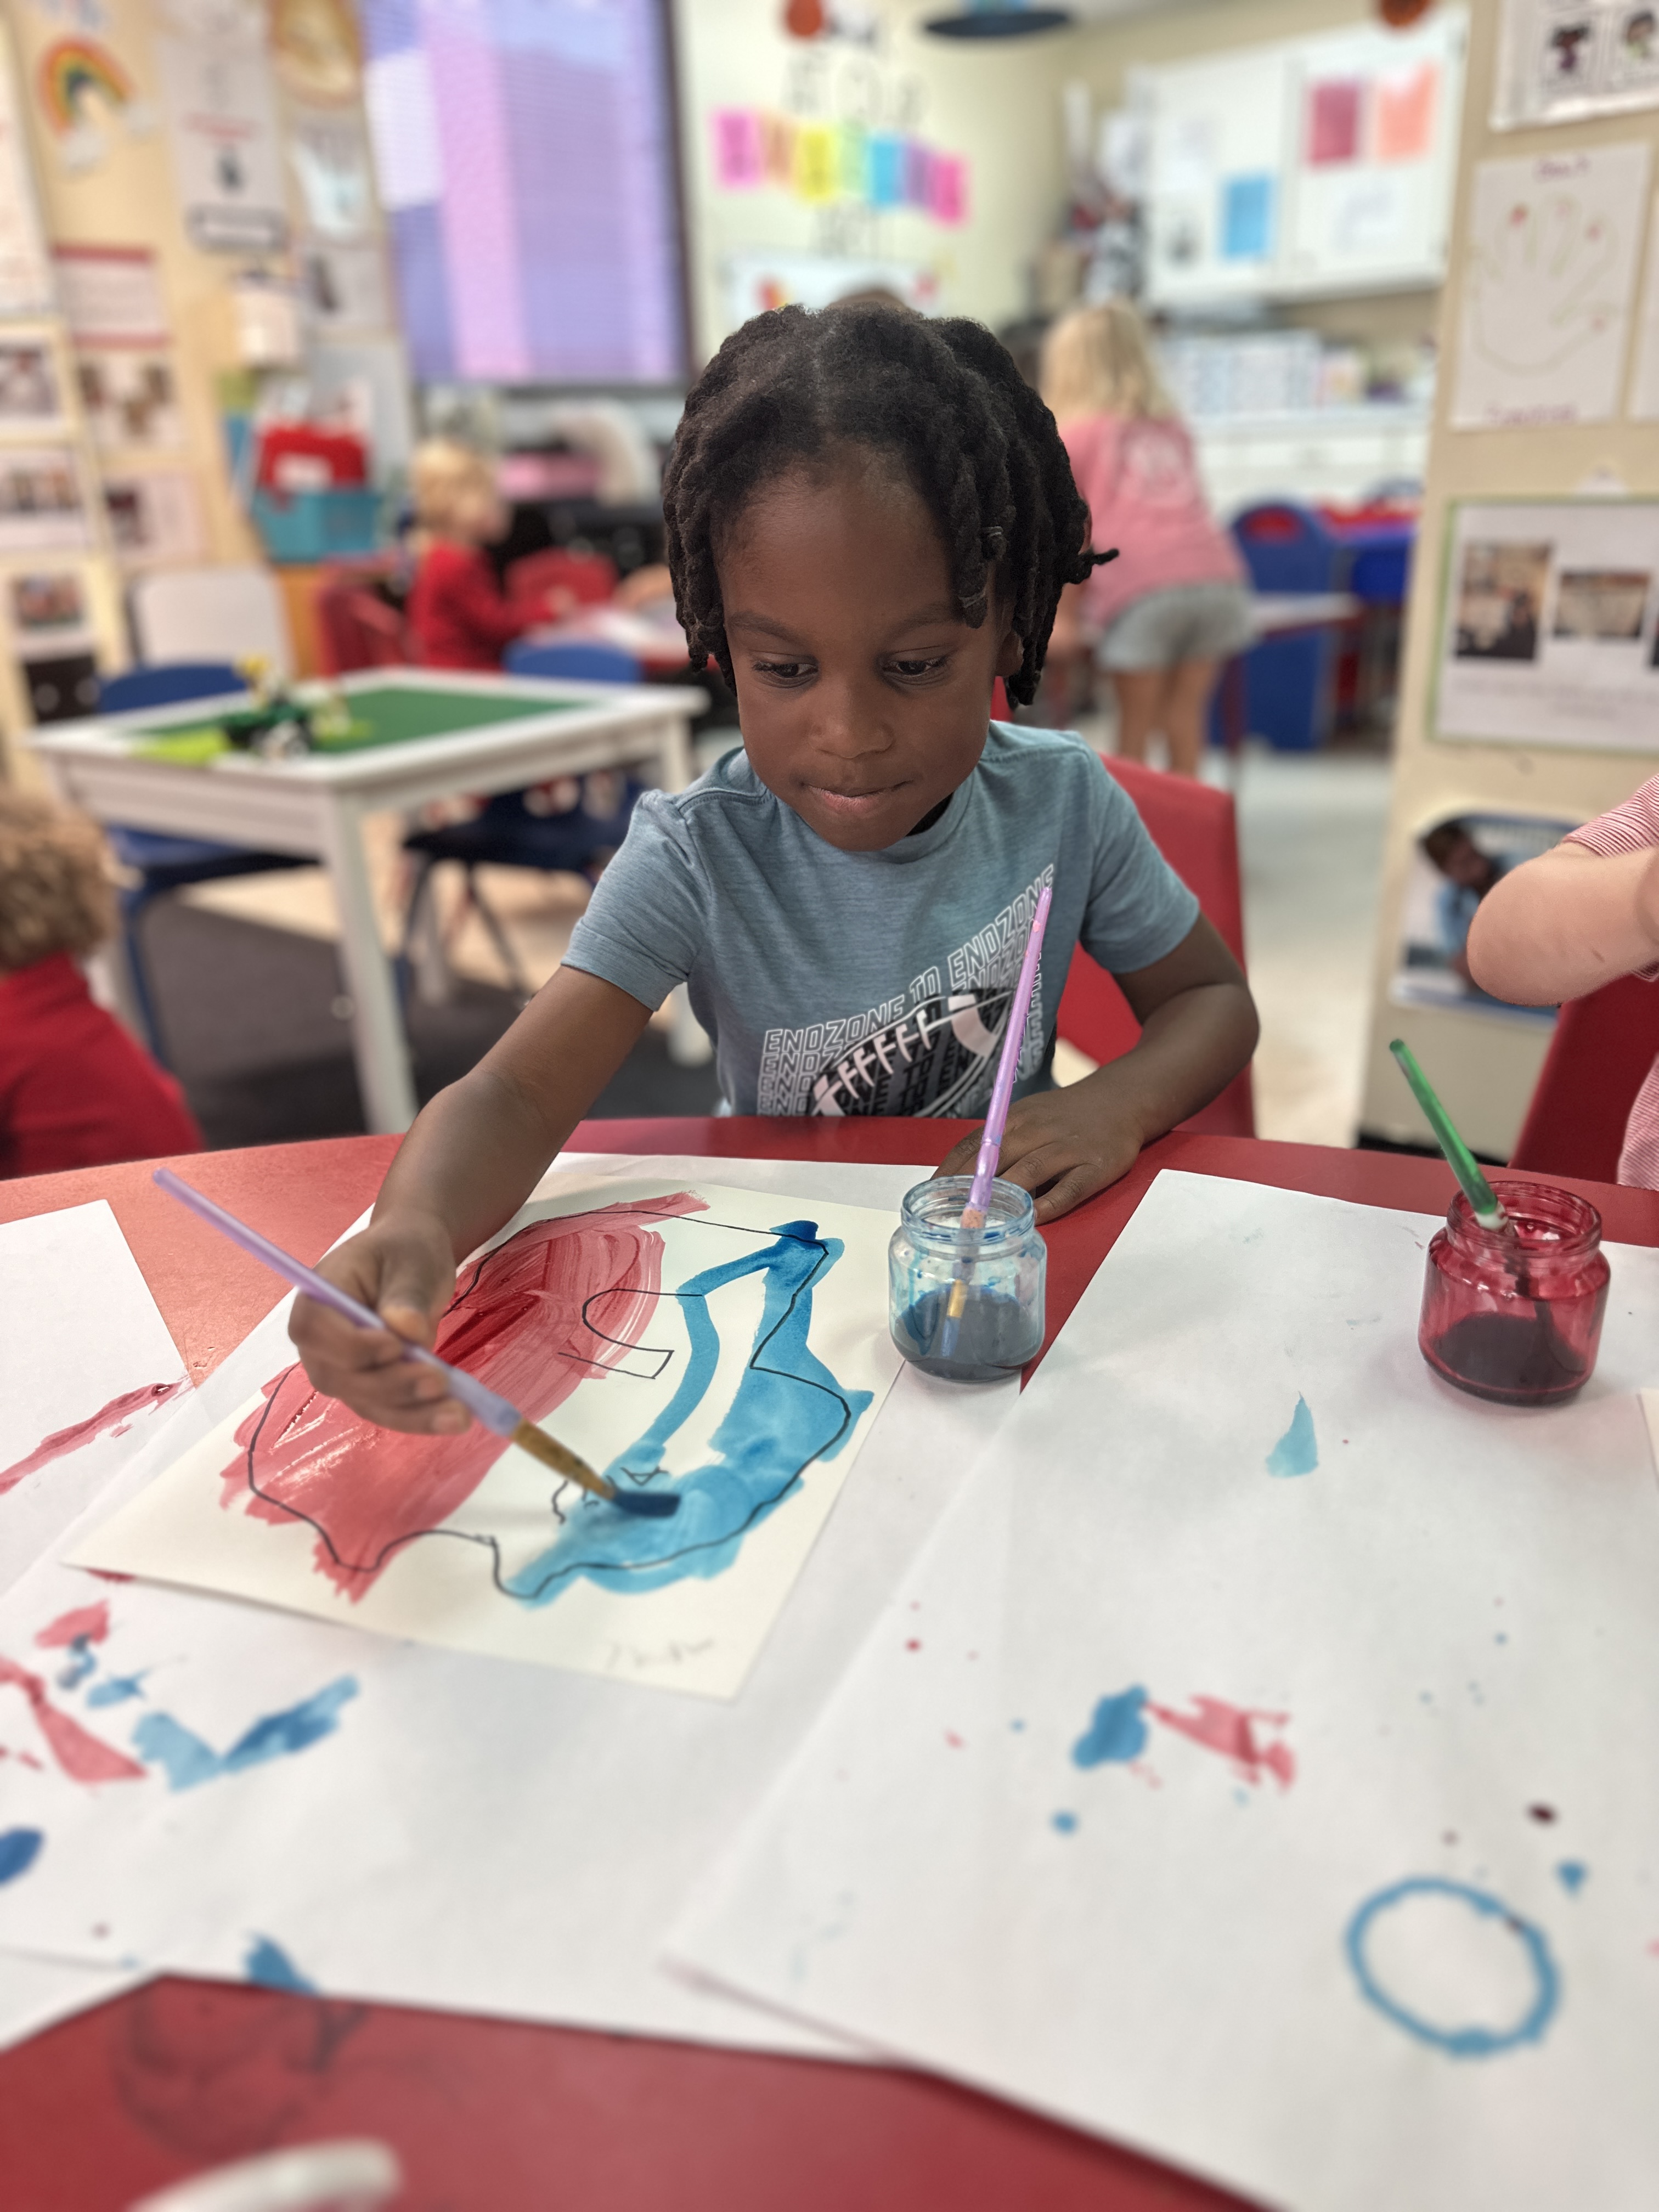 A young student is painting using red and blue water colors.